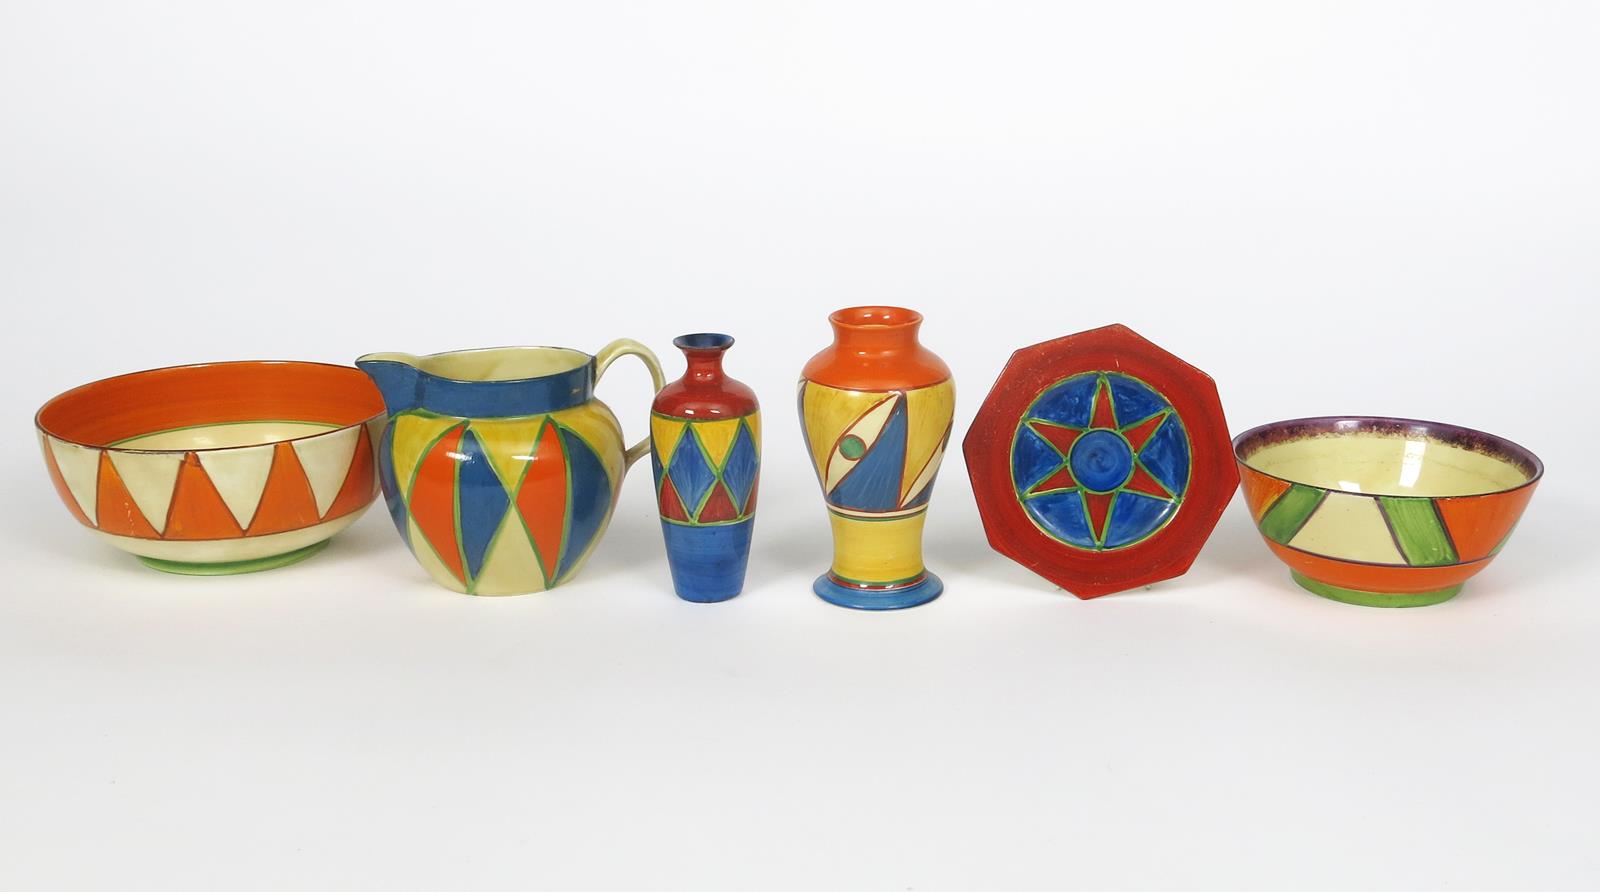 'Original Bizarre' a Clarice Cliff Mei Ping vase, painted with a geometric band between orange and - Image 2 of 2